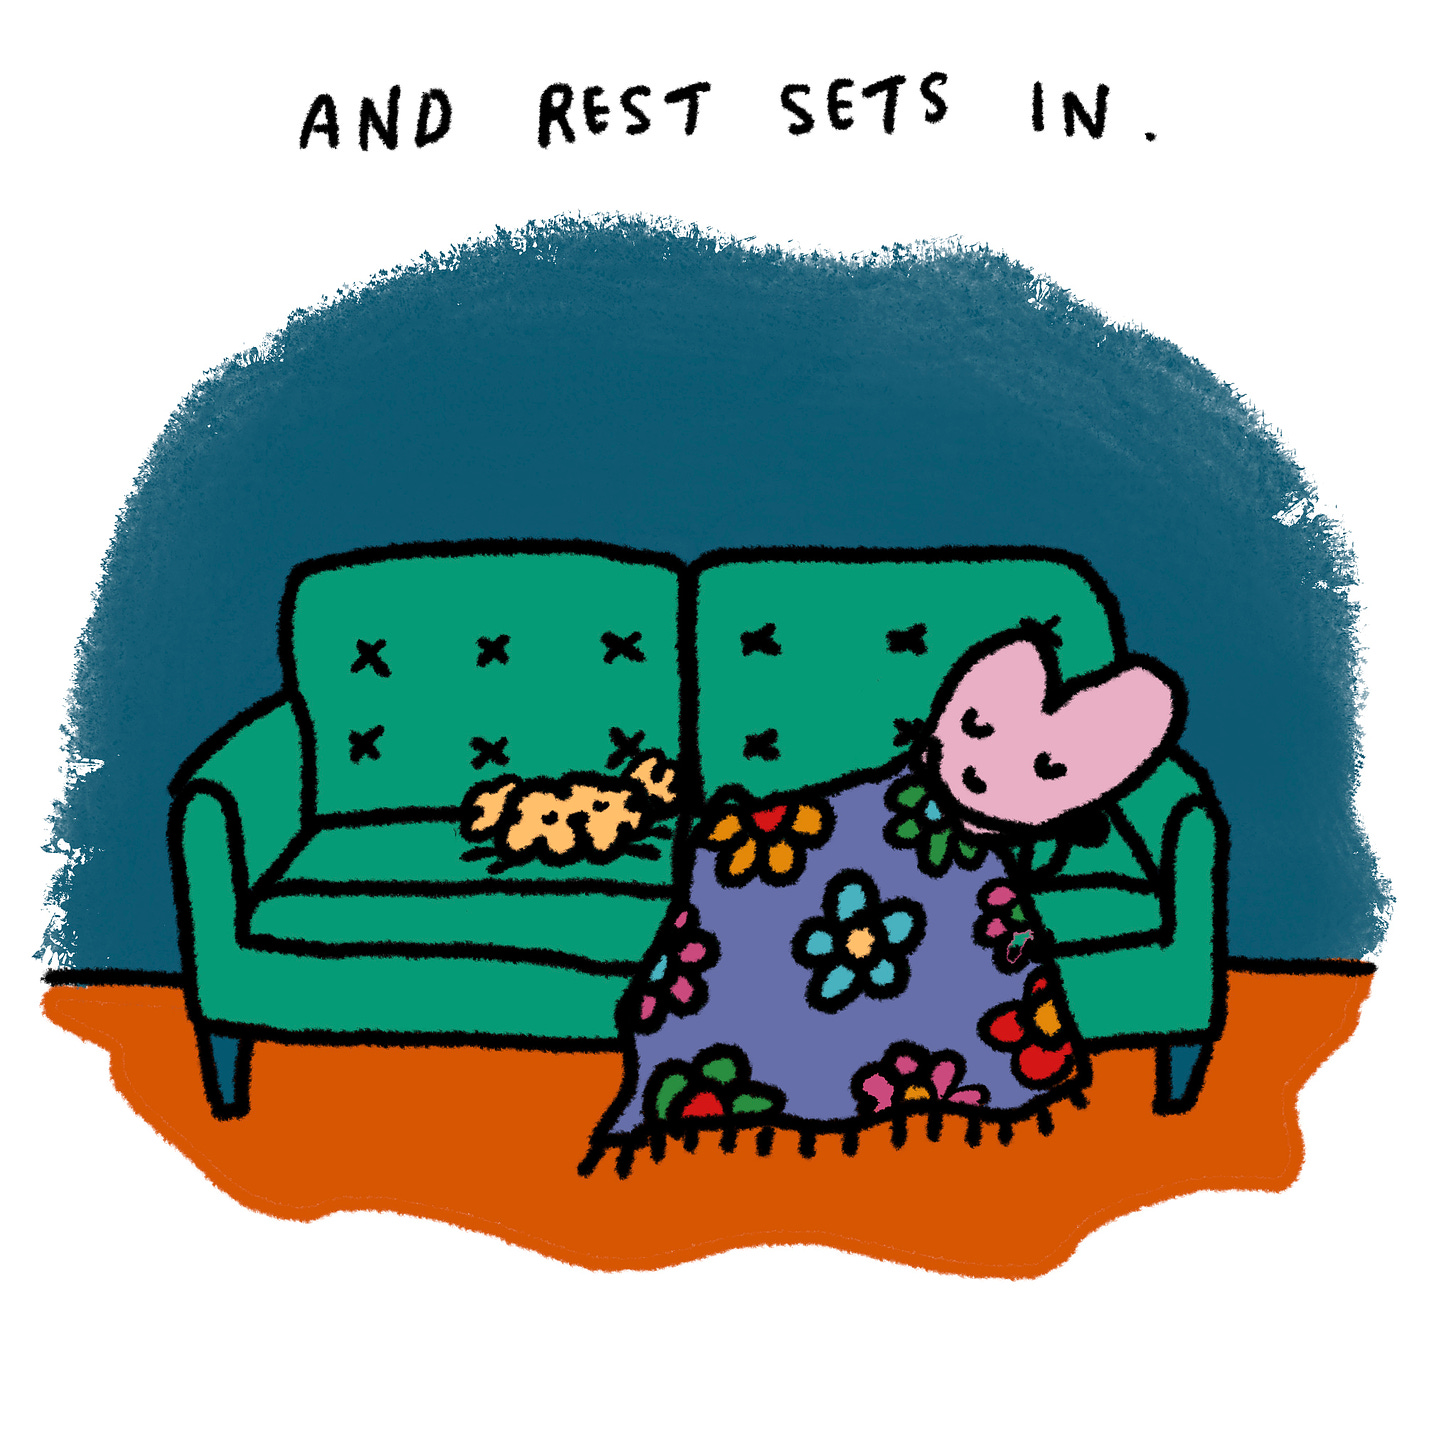 And rest sets in (image of heart character and dog sleeping on couch)